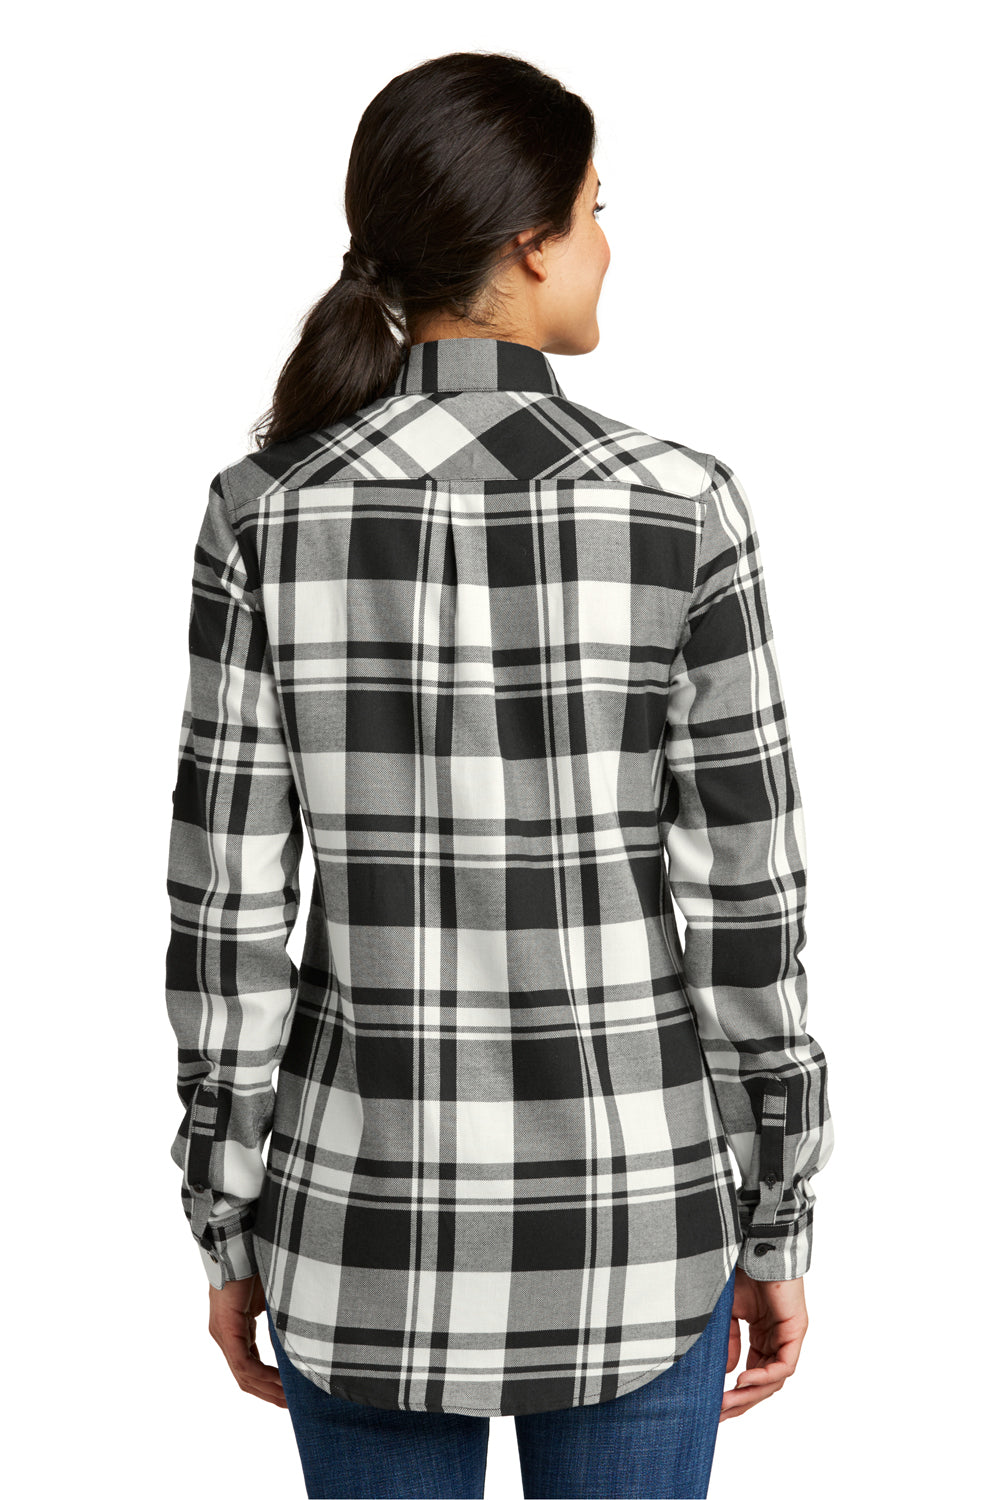 Port Authority LW668 Womens Flannel Long Sleeve Button Down Shirt White/Black Back